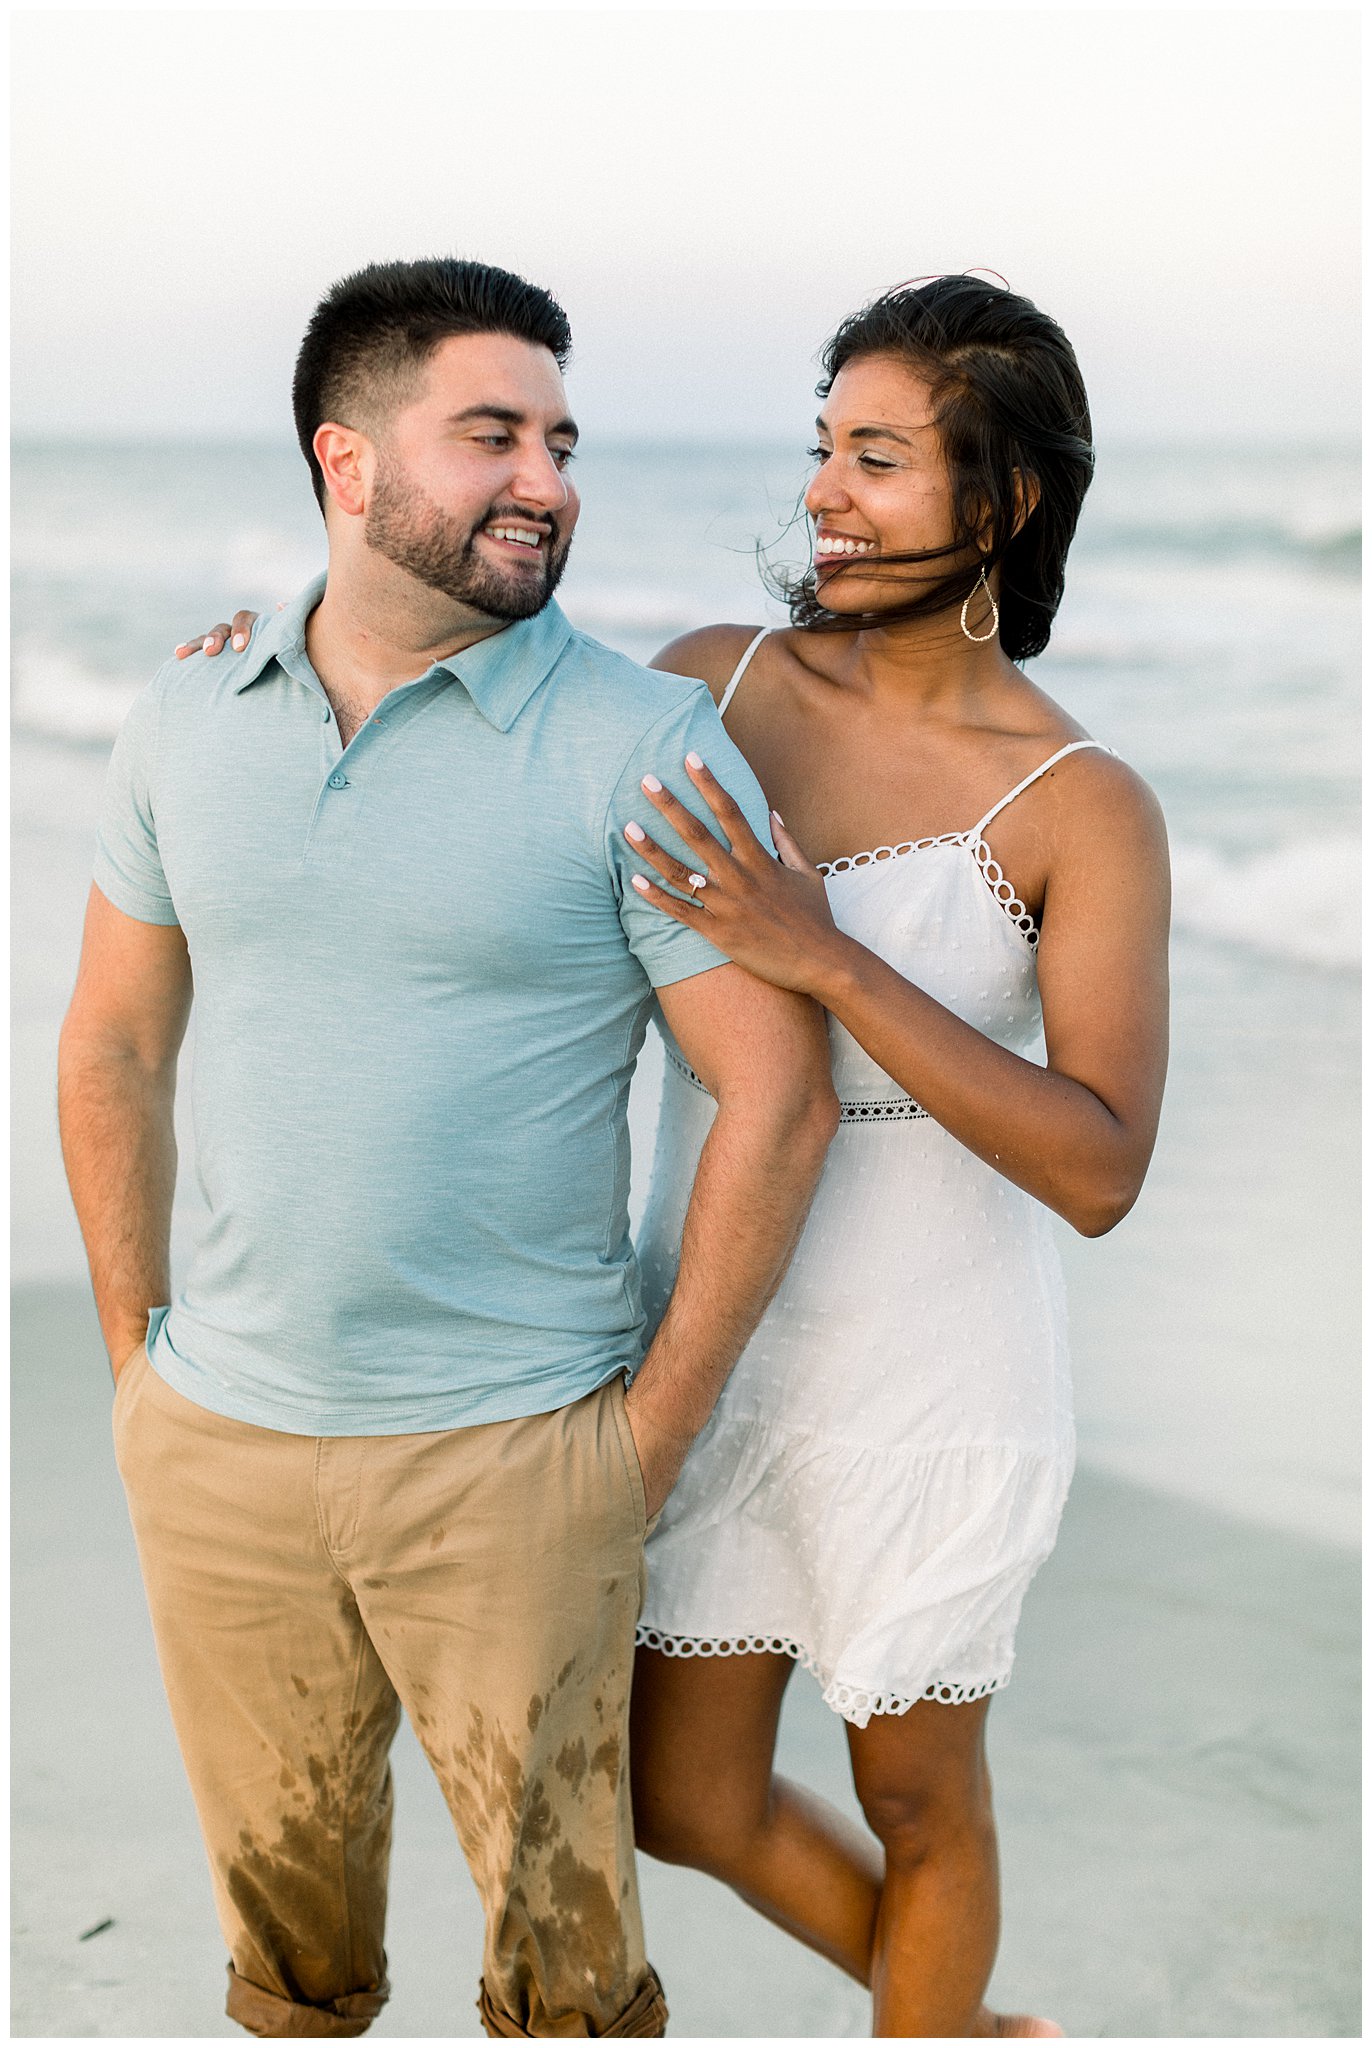 woman in white dress wraps around fiance on the beach and looks at each other with smiles